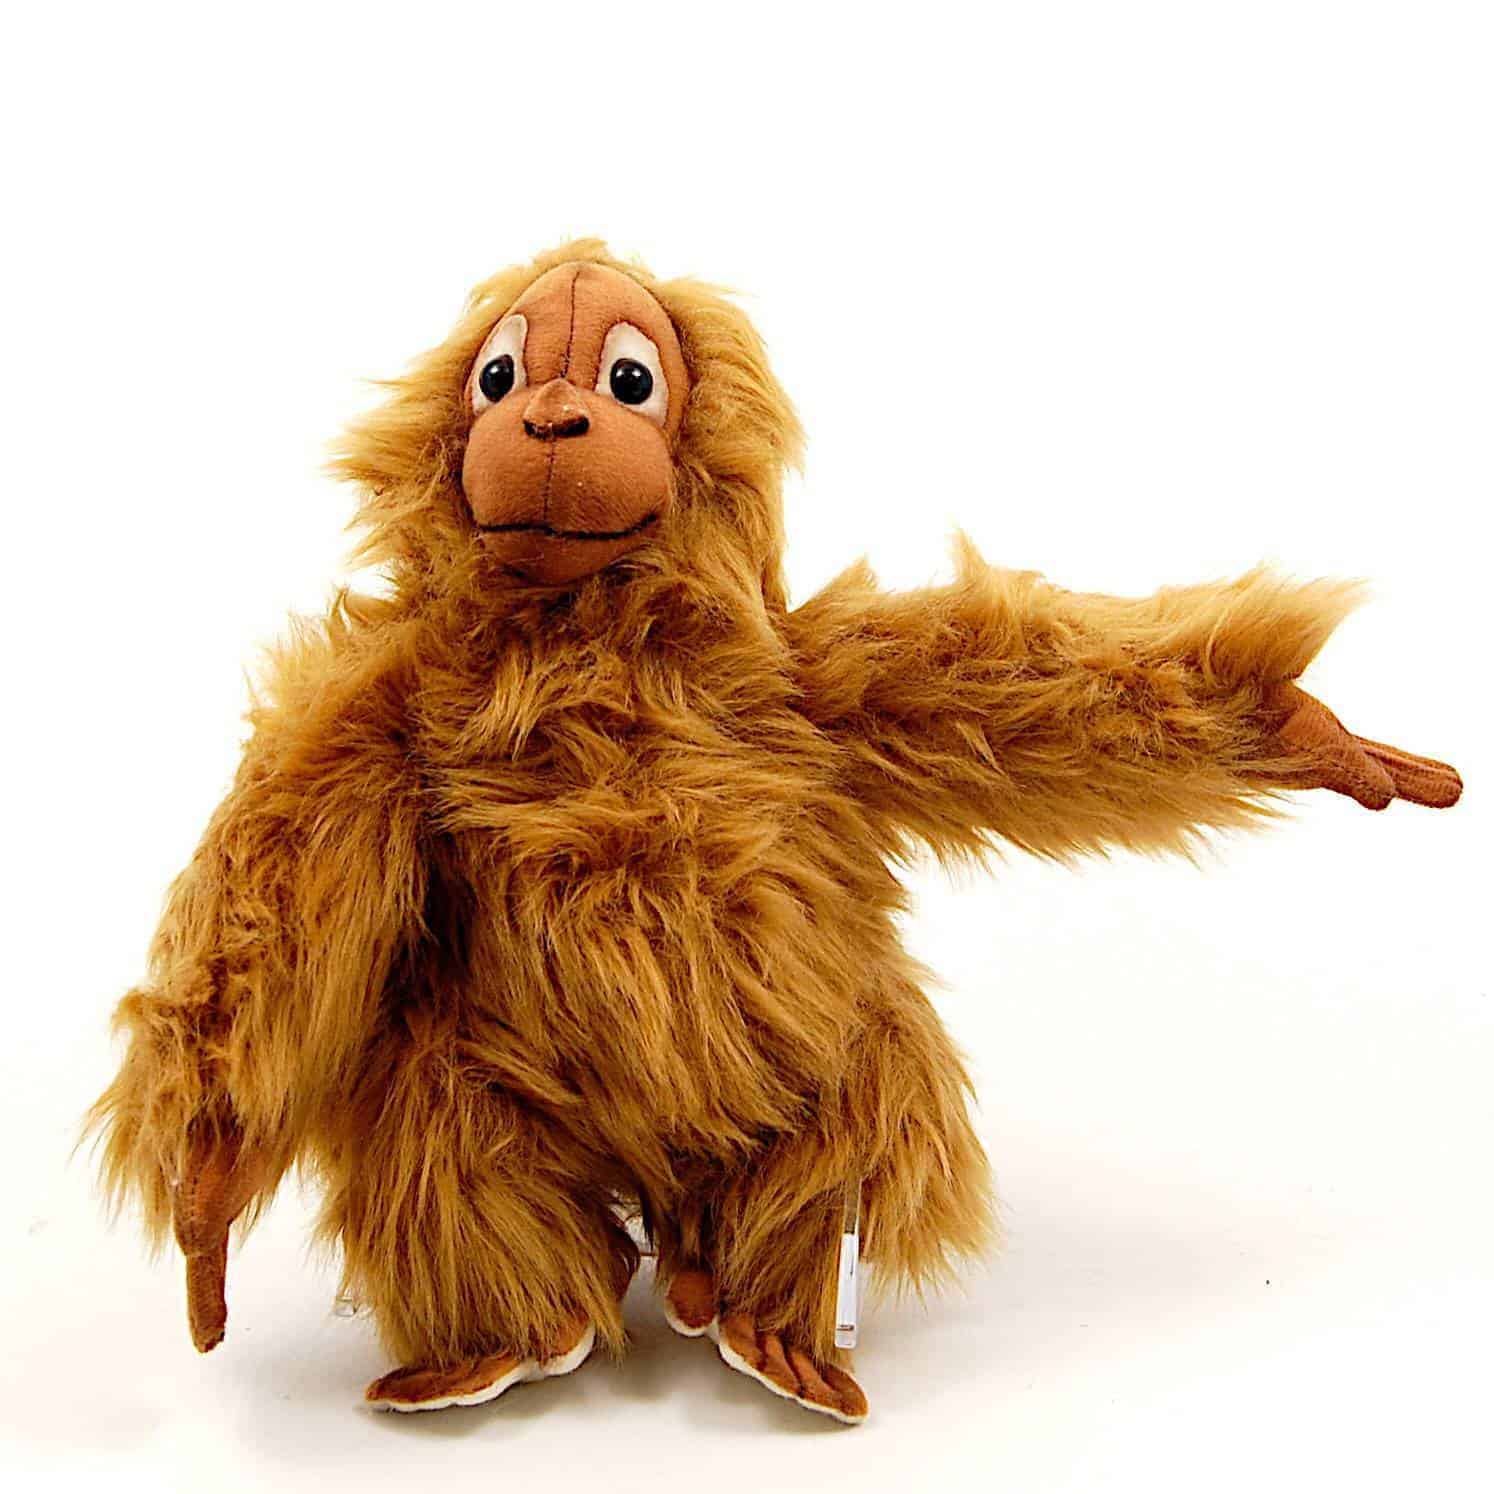 This Orangutan 10" by Hansa True to Life Look Soft Plush Animal Learning Toys is made with love by Premier Homegoods! Shop more unique gift ideas today with Spots Initiatives, the best way to support creators.